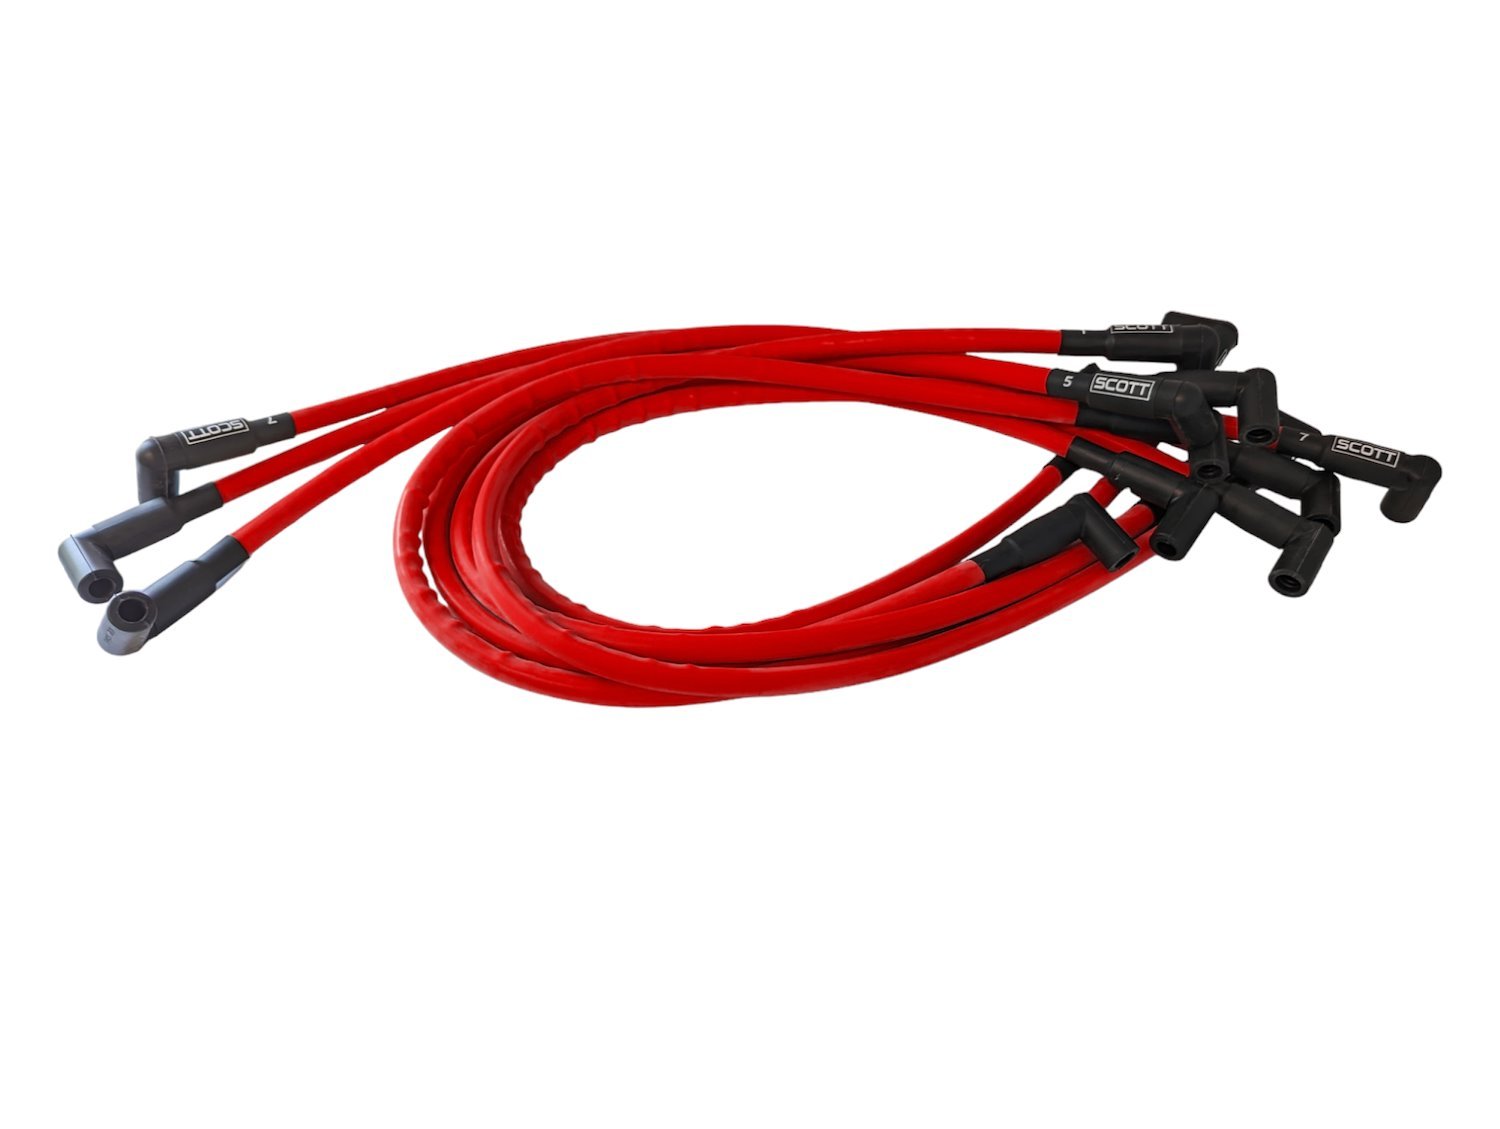 SPW300-CH-435-2 Super Mag Fiberglass-Oversleeved Spark Plug Wire Set for Small Block Chevy, Around Front [Red]